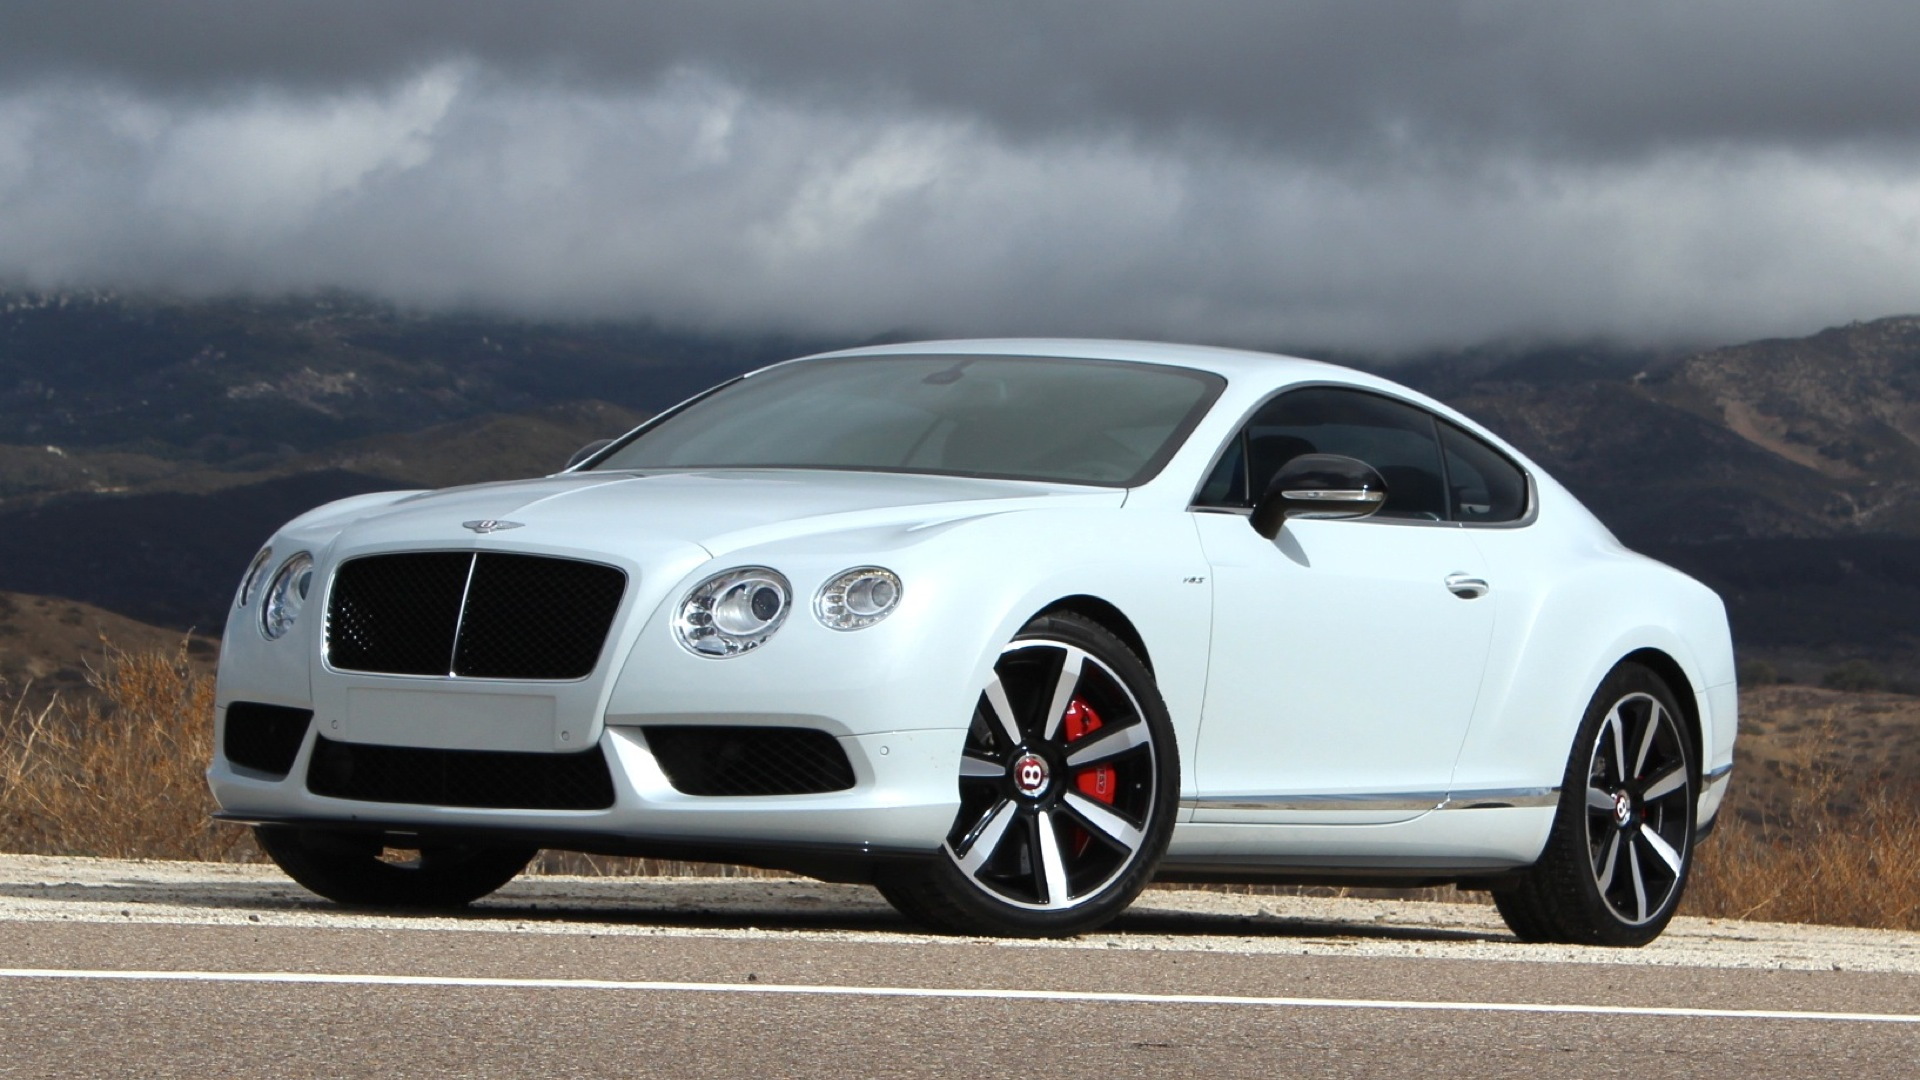 Experience The Power Of Luxury: 2014 Bentley Continental GT V8 S